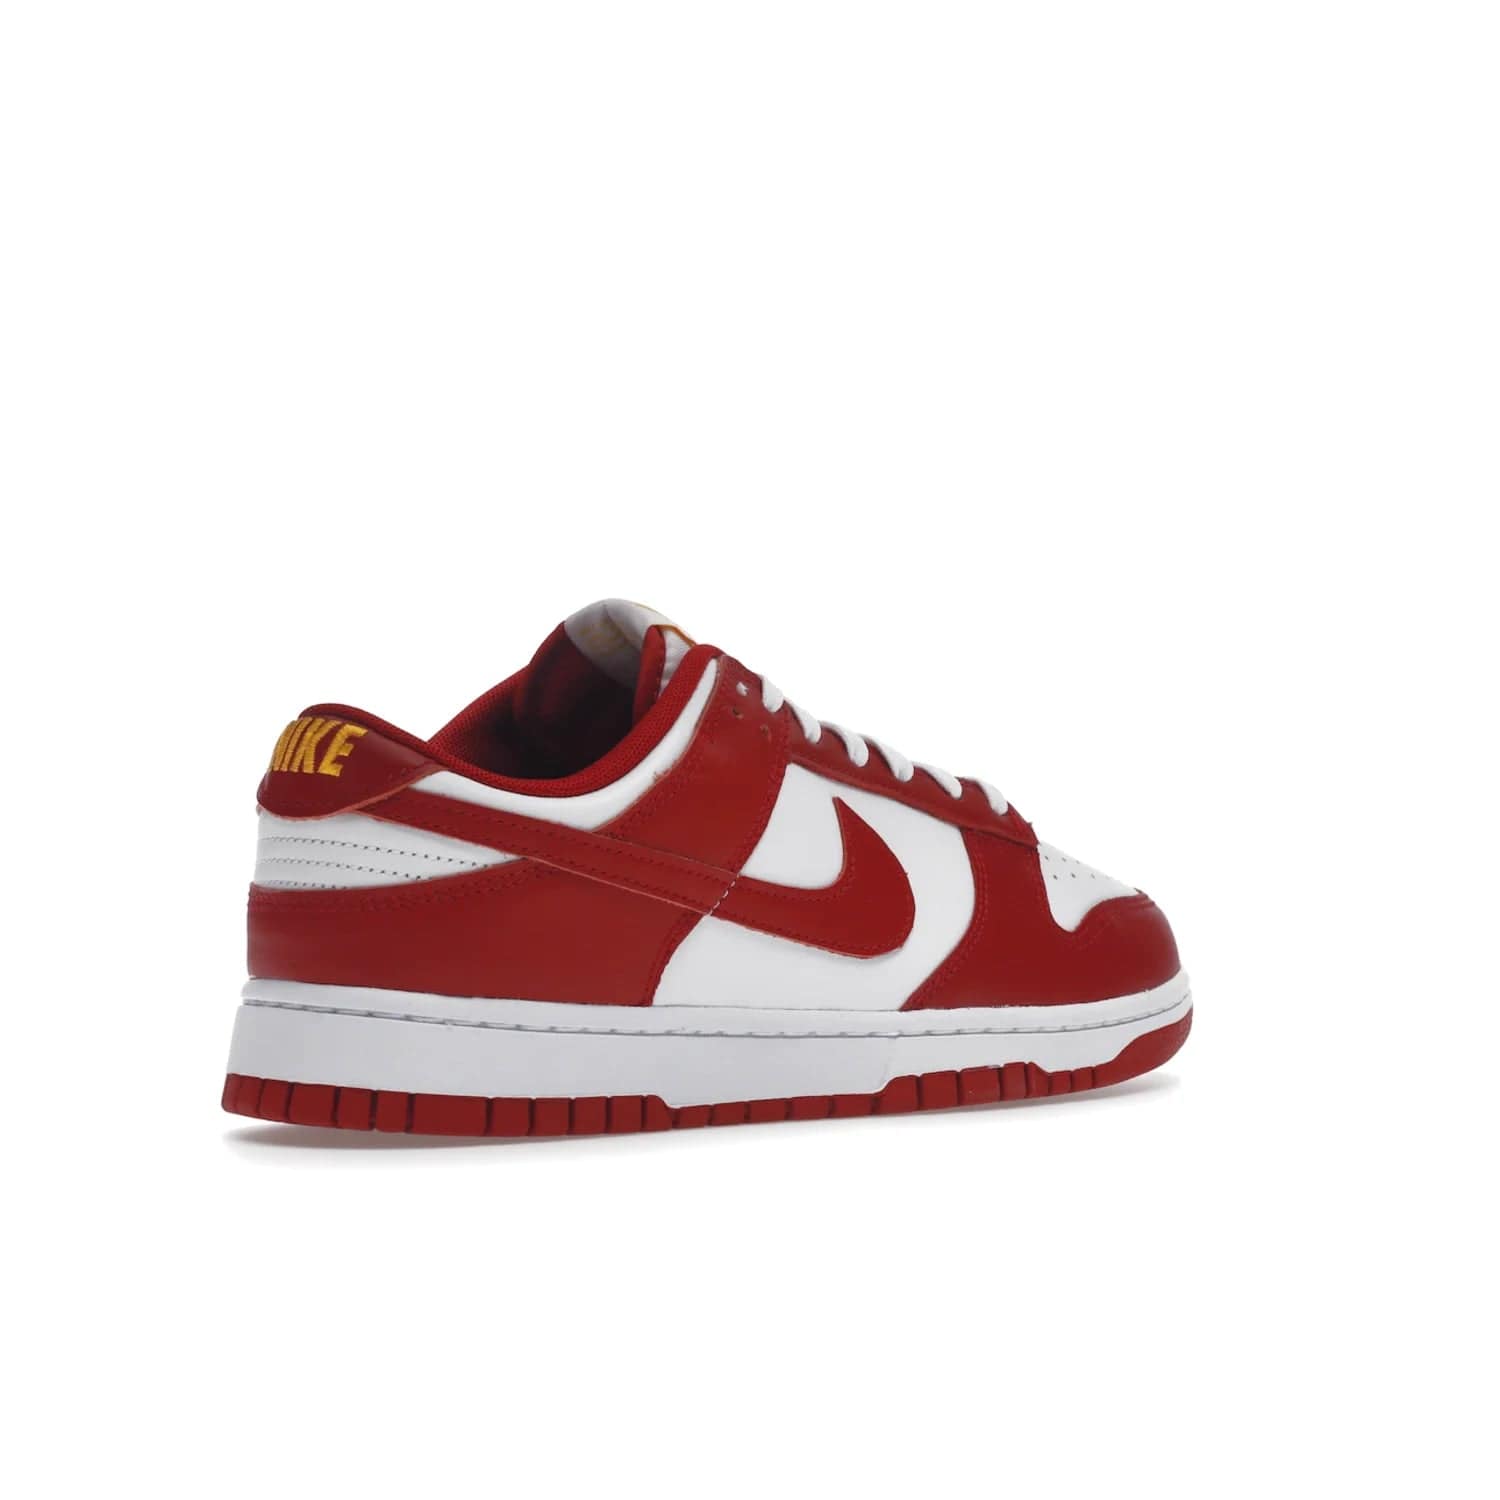 Nike Dunk Low USC - Image 33 - Only at www.BallersClubKickz.com - The Nike Dunk Low USC DD1391-602 colorway captures the eye of University of Southern California fans. Crafted with leather and rubber upper and outsole, this stylish sneaker features a white, gym red, and yellow colorway. With yellow Nike branding, white perforated vamp, and red suede Swoosh, this sneaker turns heads. Get the classic Nike Dunk Low USC releasing on November 9th, 2022.